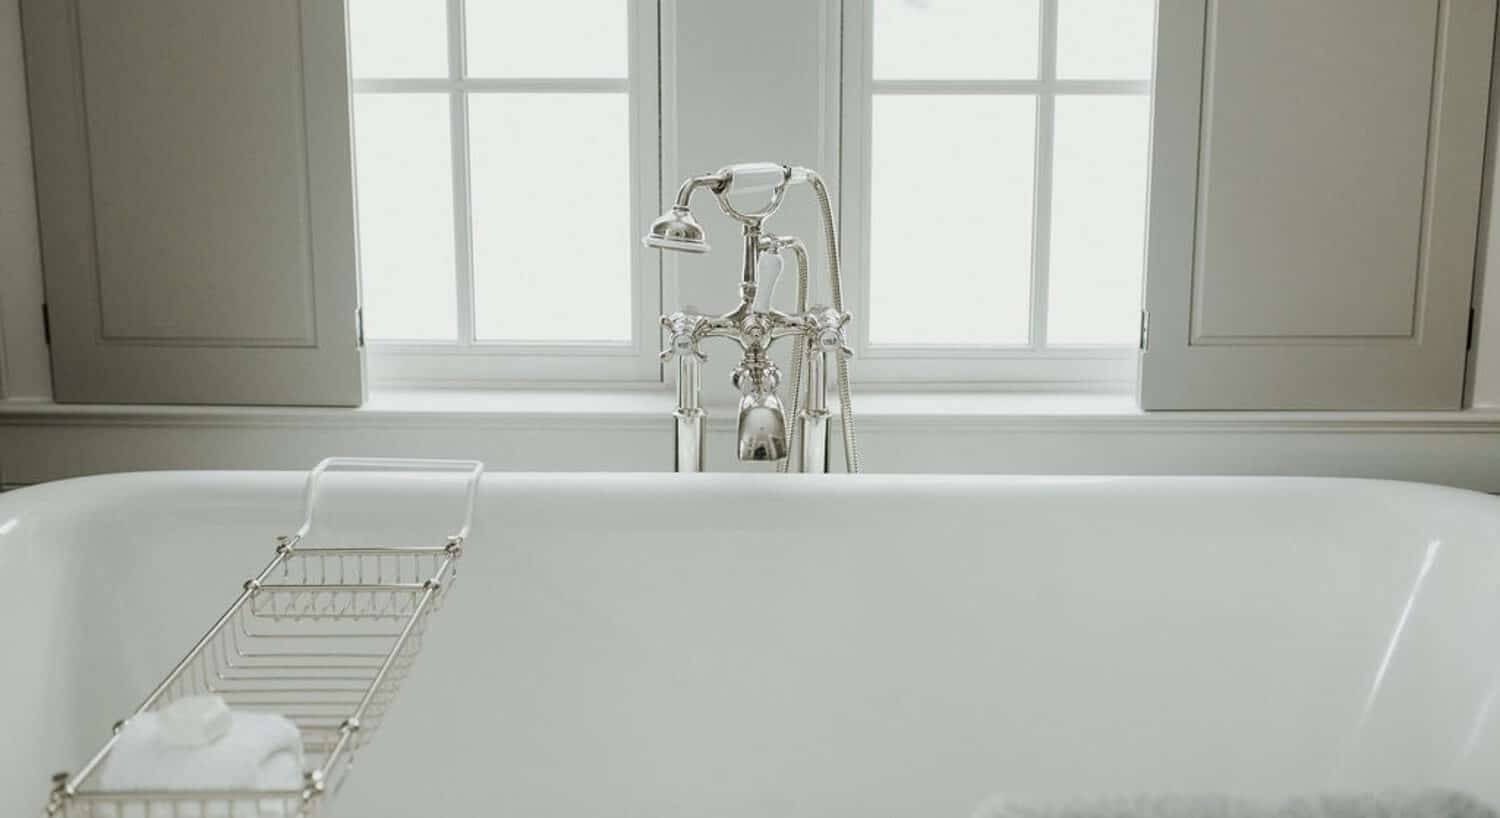 Large white soaker tub with elegant silver details in front of a bright window with shutters